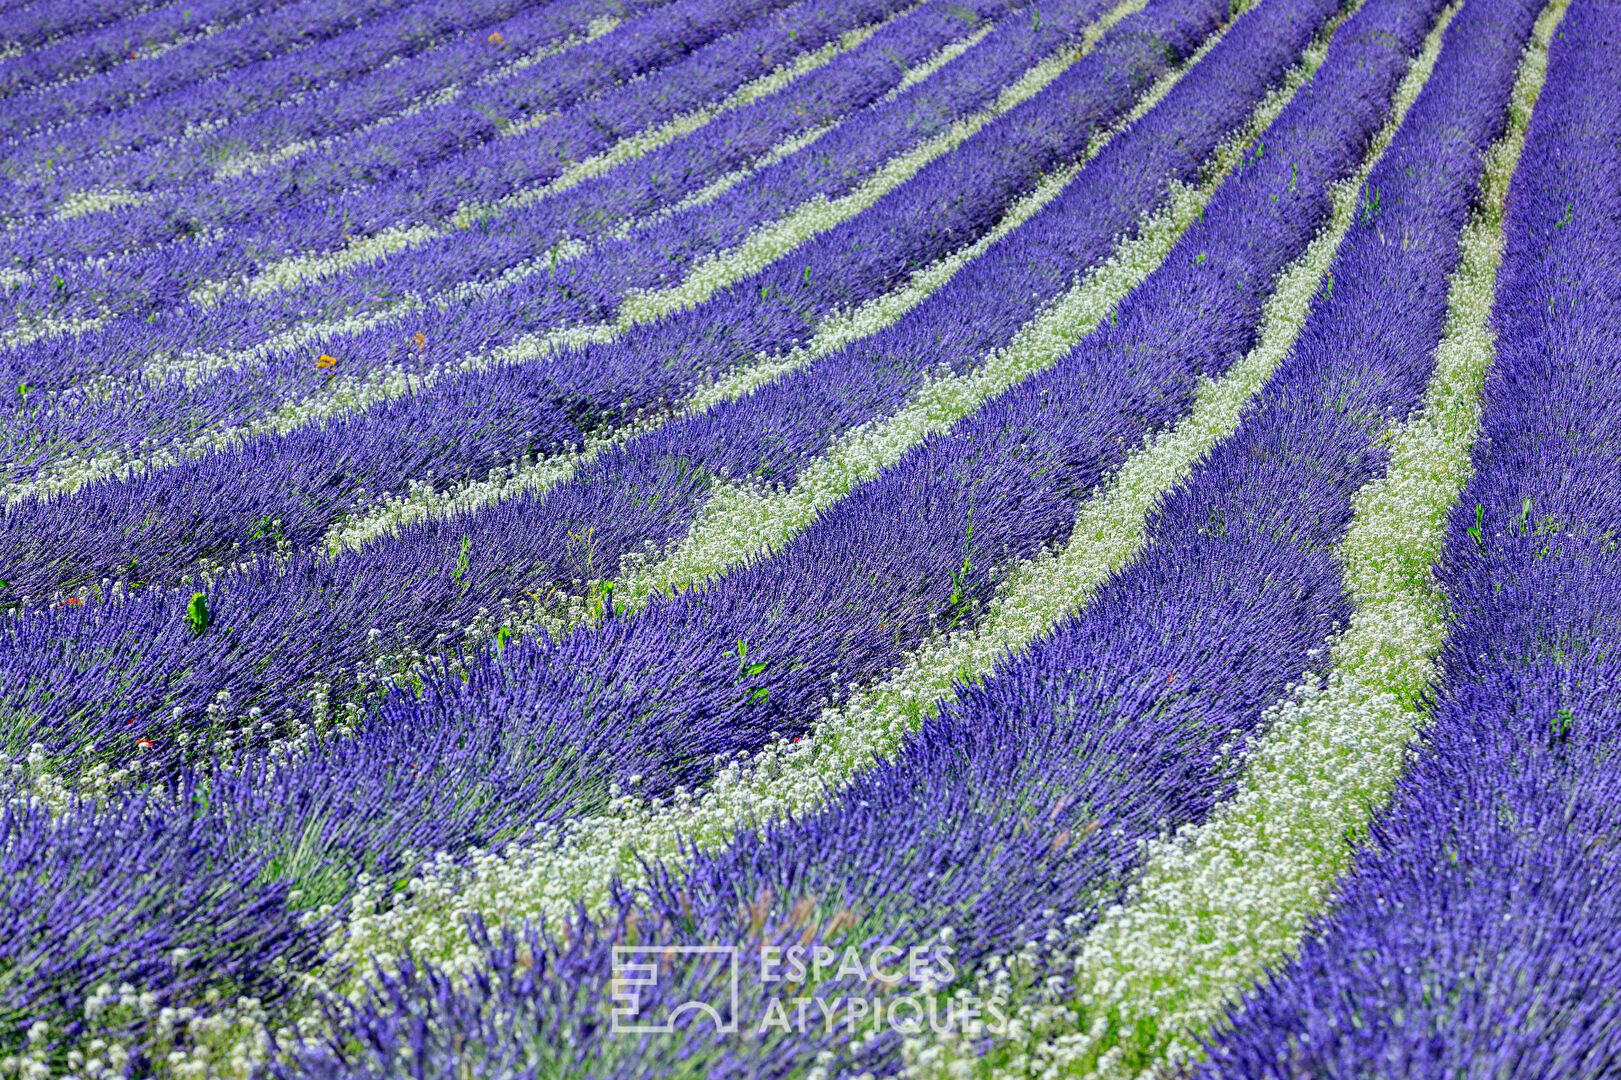 Meeting room and lavender fields